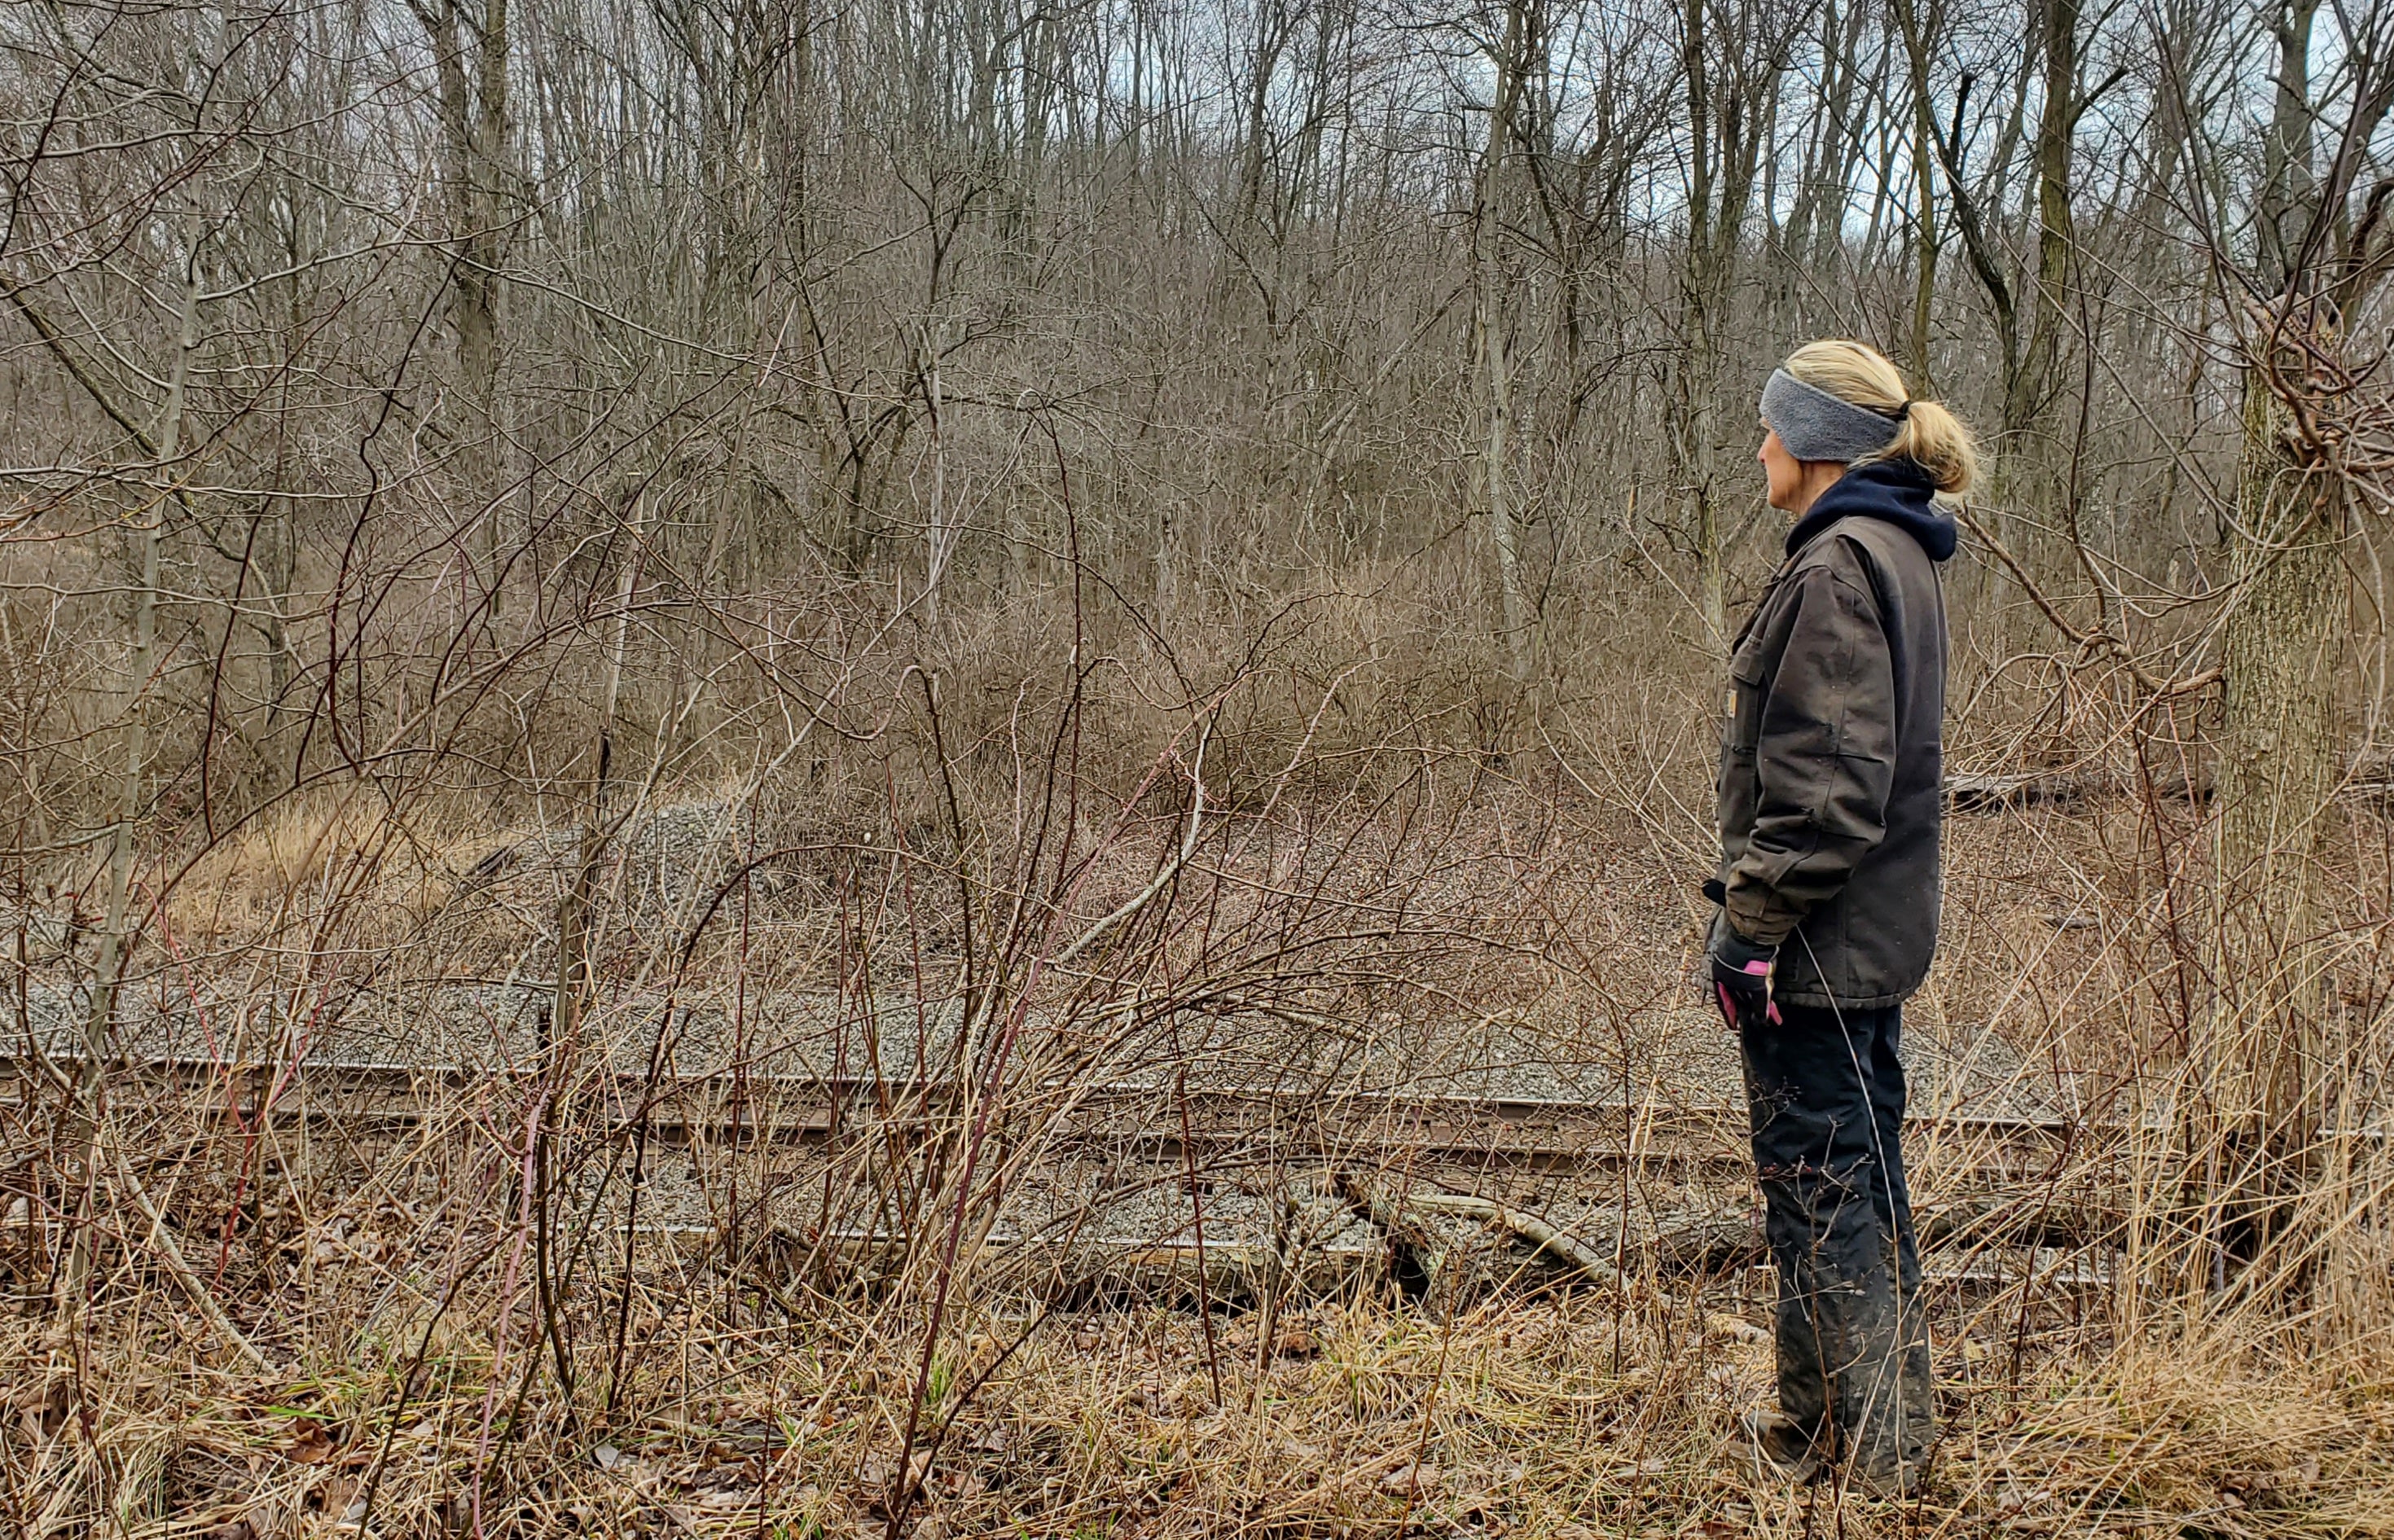 Sonia Early, owner of the Early Equine Centre near East Palestine, Ohio, examines the Norfolk Southern tracks behind her property